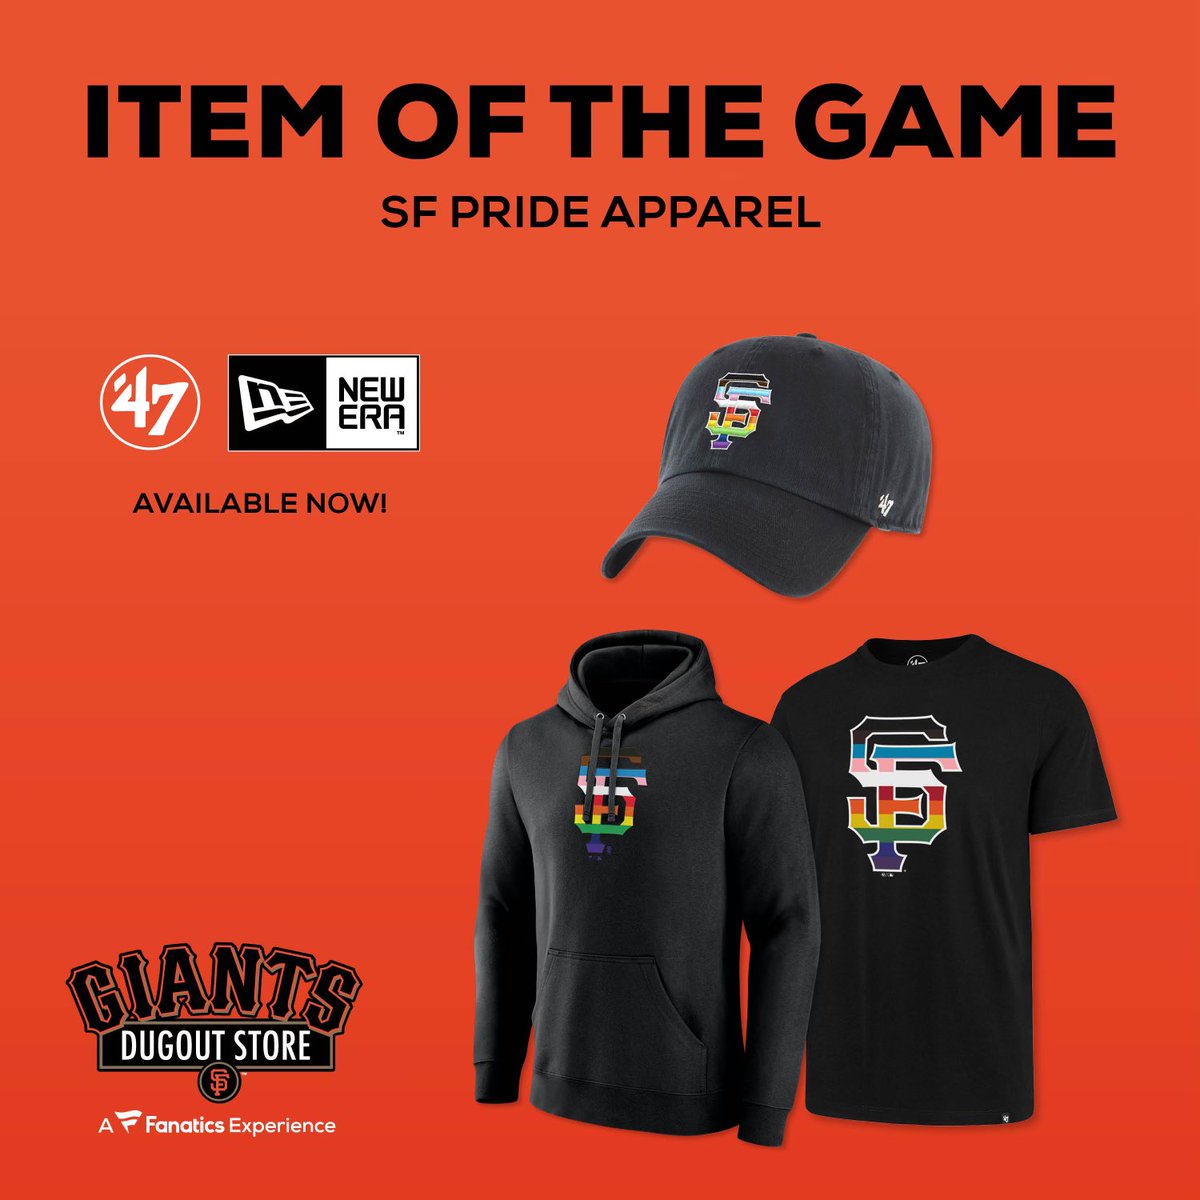 Giants Dugout Store on X: It's #Pride Day at #OraclePark! Check out  today's #itemofthegame featuring a variety of #pride apparel, headwear,  & novelty! Available now at the #OraclePark dugout store, & various